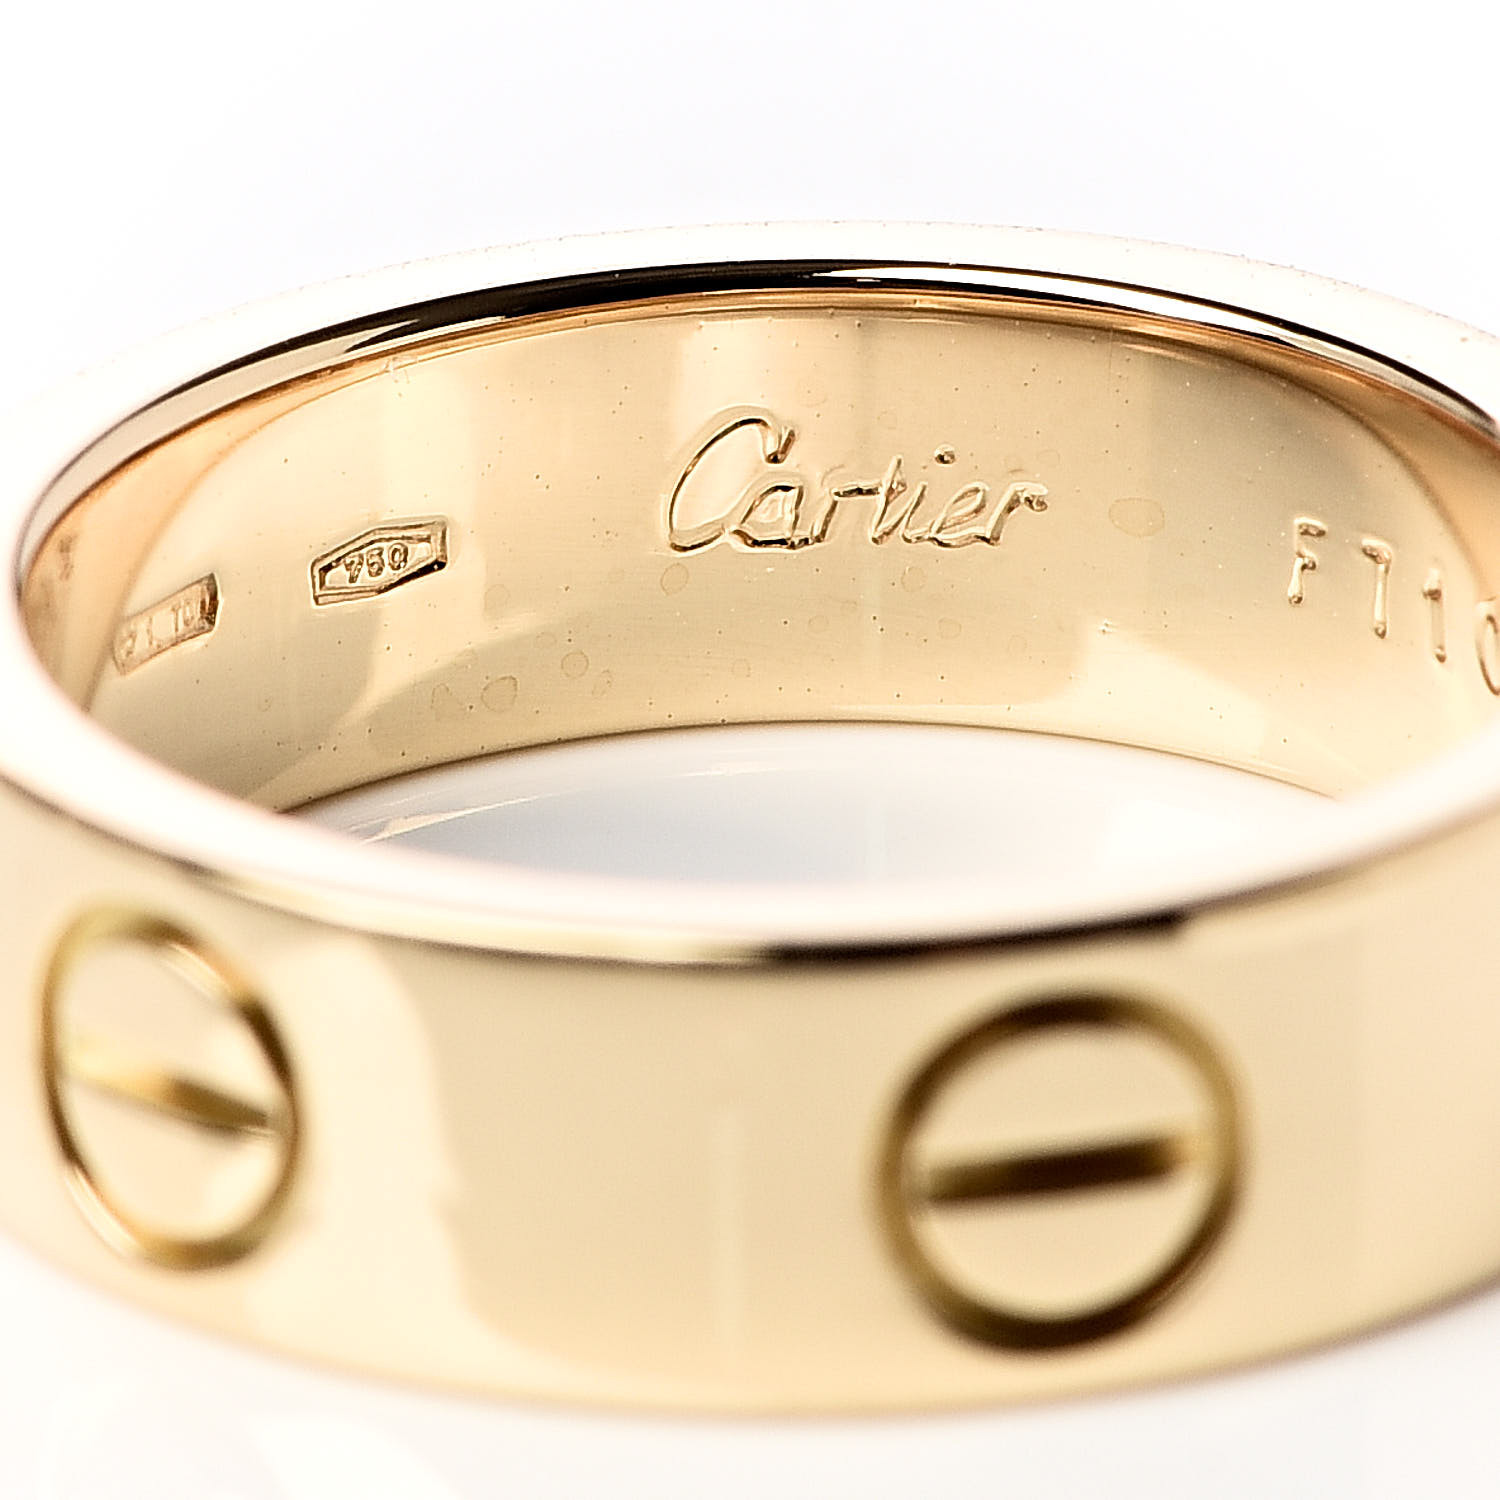 Cartier 18k Yellow Gold 55mm Love Ring 51 575 501623